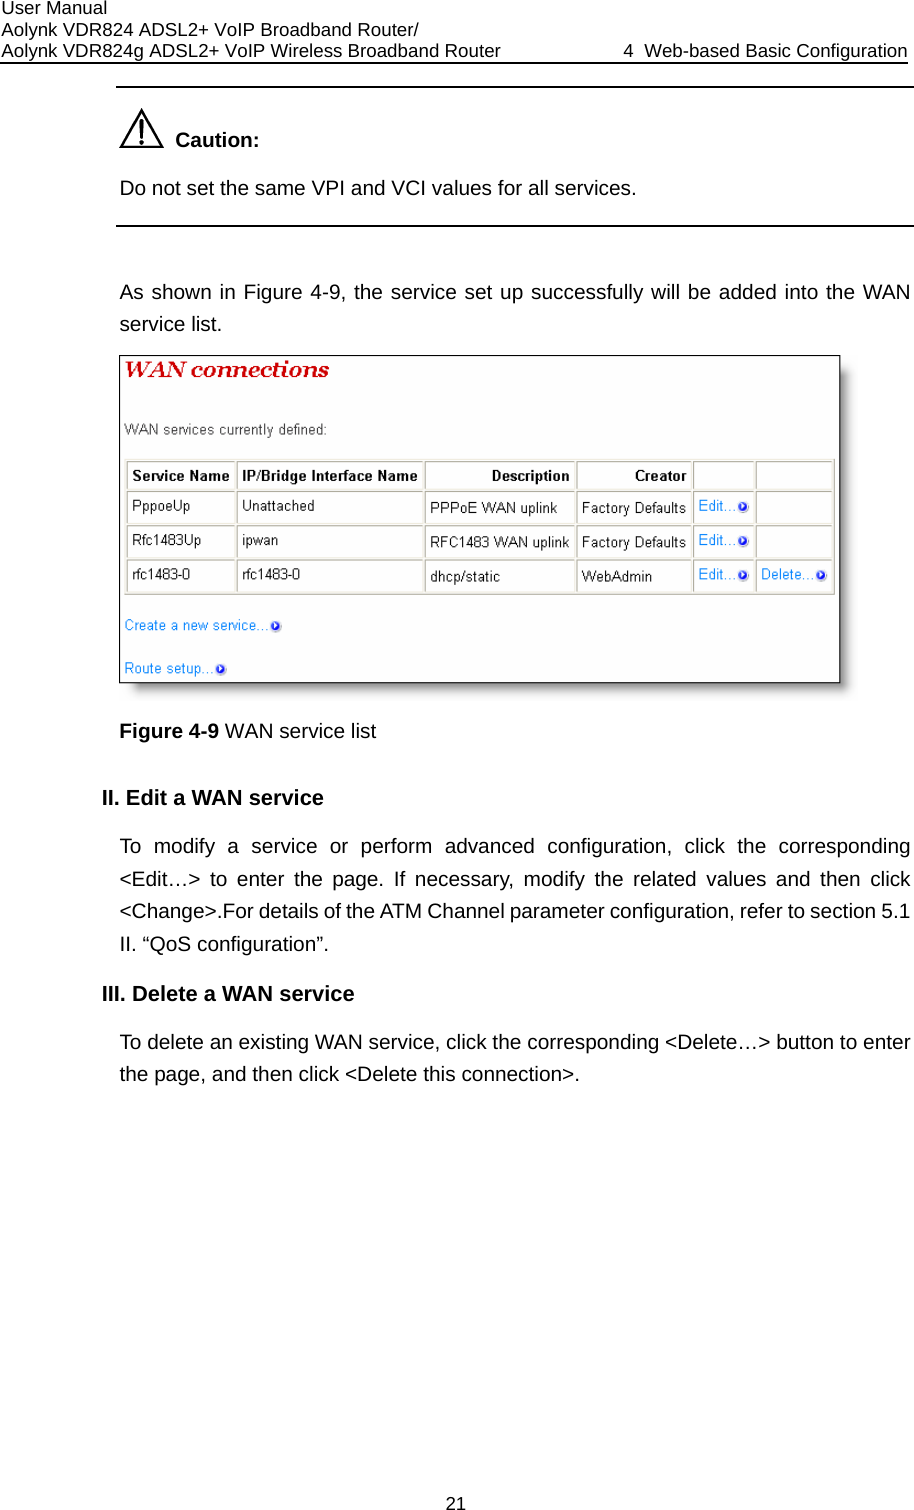 User Manual Aolynk VDR824 ADSL2+ VoIP Broadband Router/ Aolynk VDR824g ADSL2+ VoIP Wireless Broadband Router  4  Web-based Basic Configuration 21   Caution: Do not set the same VPI and VCI values for all services.  As shown in Figure 4-9, the service set up successfully will be added into theservice list.  WAN  Figure 4-9 WAN service list AN service To modify a service or perform advanced configuration, click the corresponding II  service II. Edit a W&lt;Edit…&gt; to enter the page. If necessary, modify the related values and then click &lt;Change&gt;.For details of the ATM Channel parameter configuration, refer to section 5.1  II. “QoS configuration”. I. Delete a WANTo delete an existing WAN service, click the corresponding &lt;Delete…&gt; button to enter the page, and then click &lt;Delete this connection&gt;. 